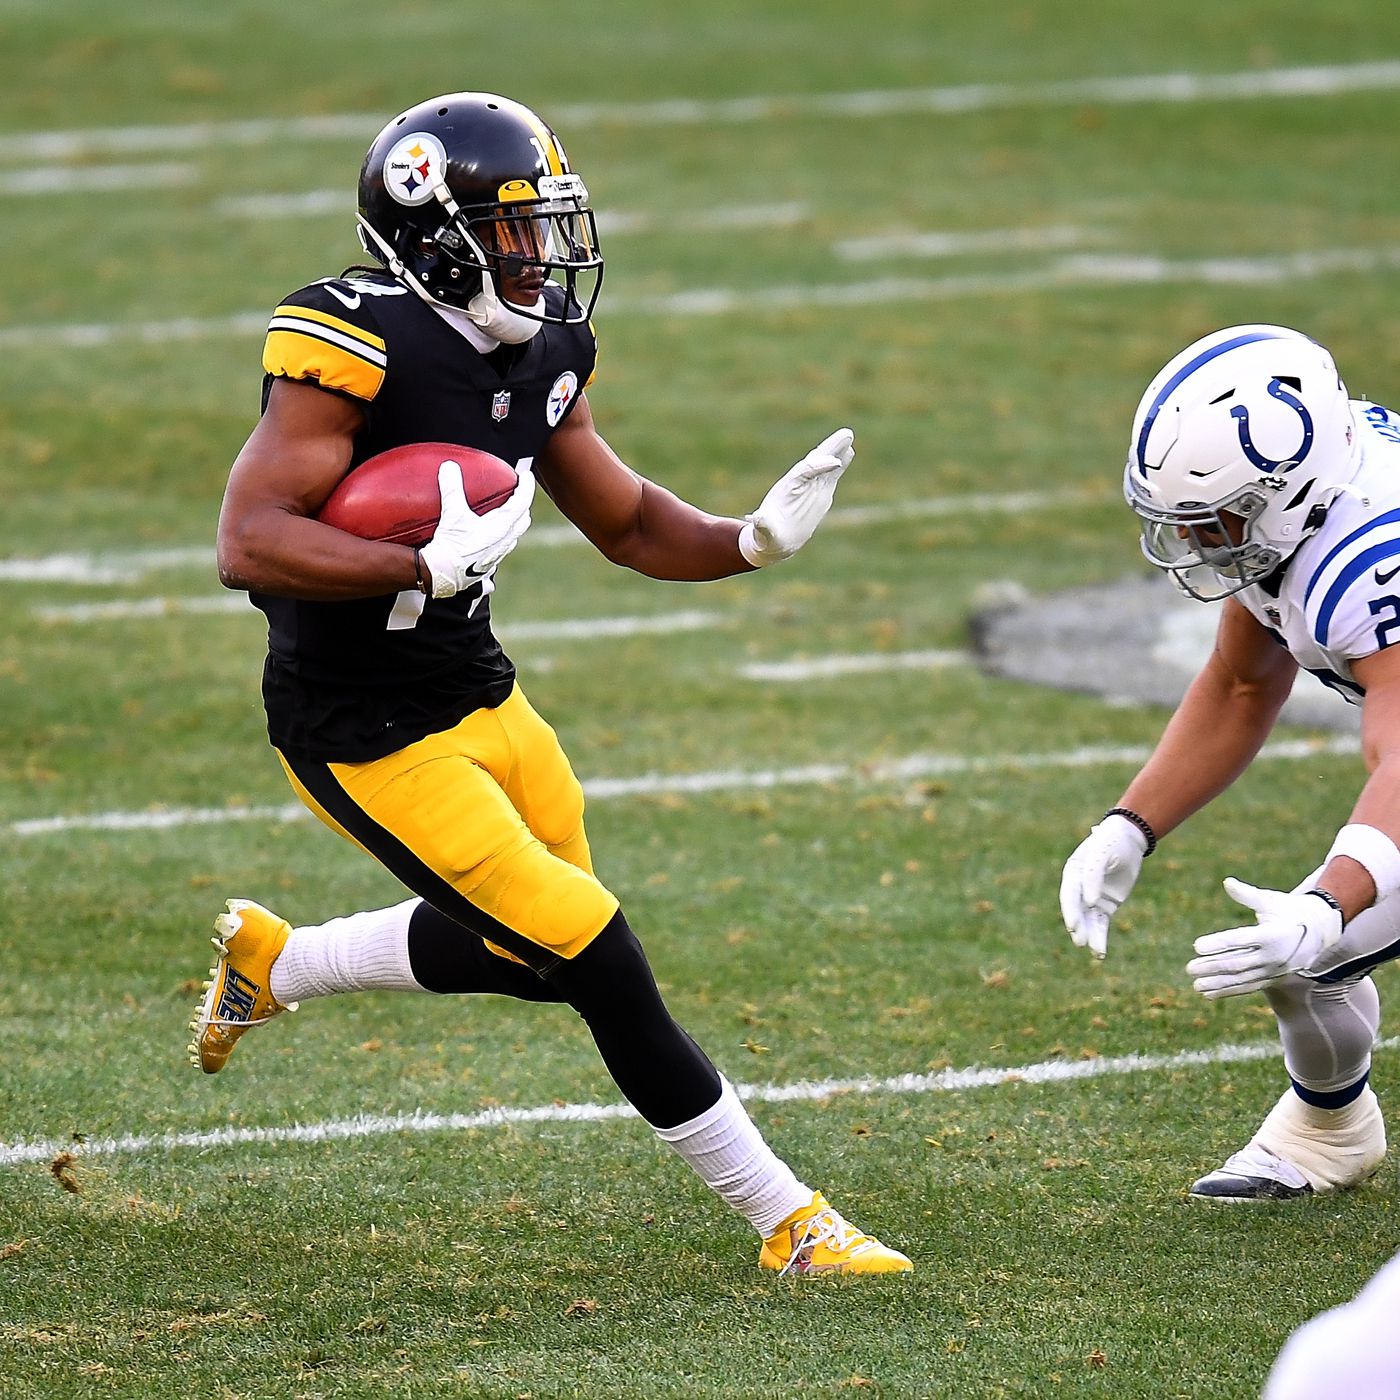 Steelers vs Colts Opening Odds, Betting Lines & Prediction for